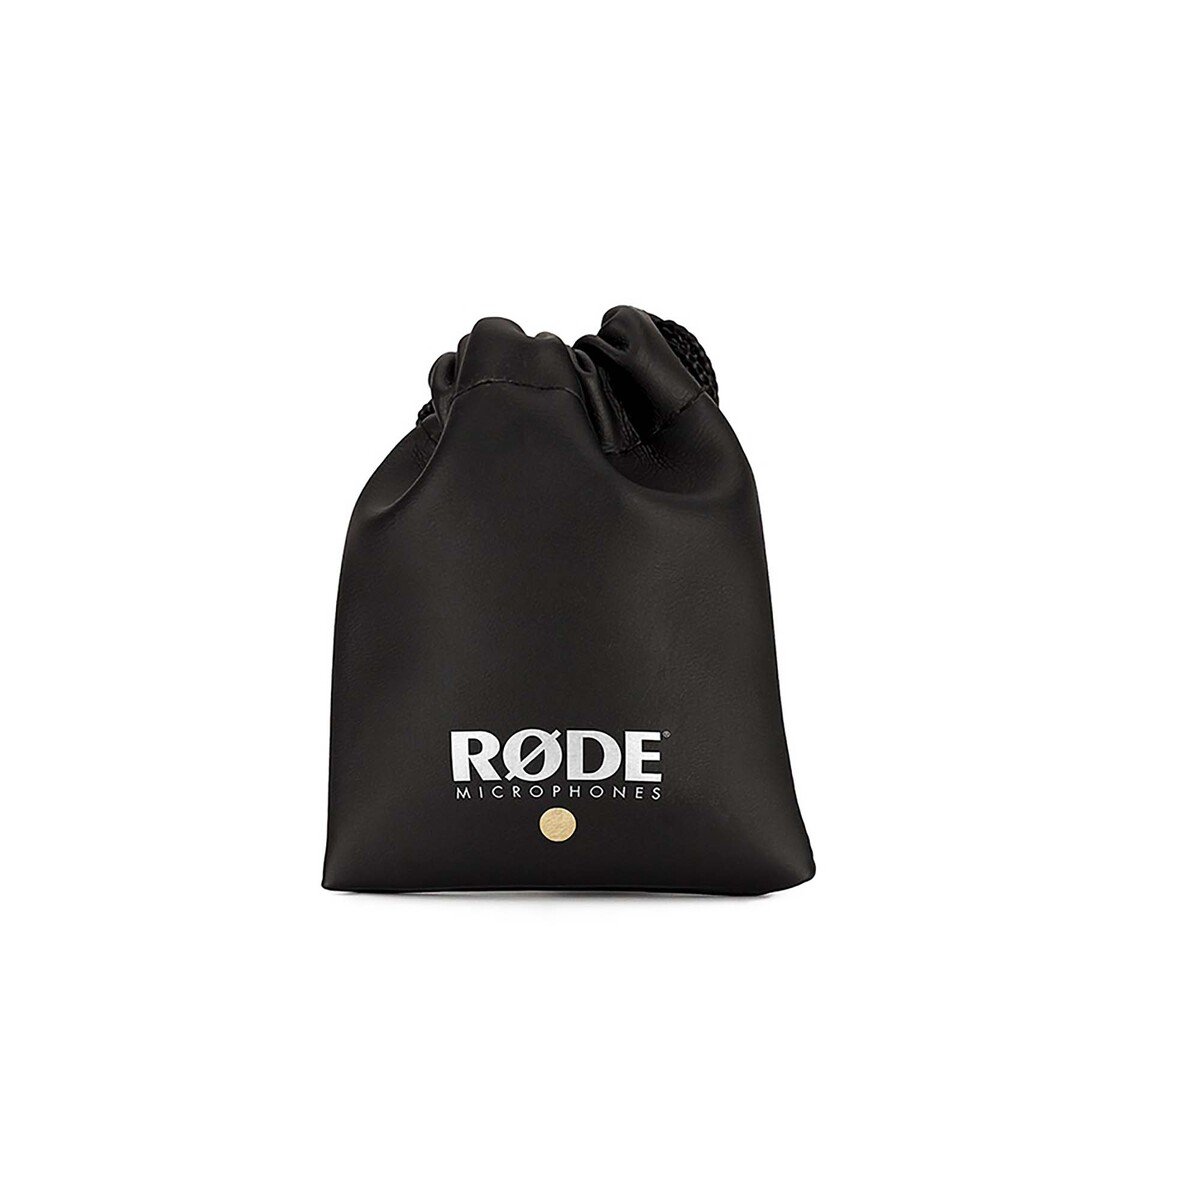 Rode Professional-grade Wearable Microphone Lavalier GO